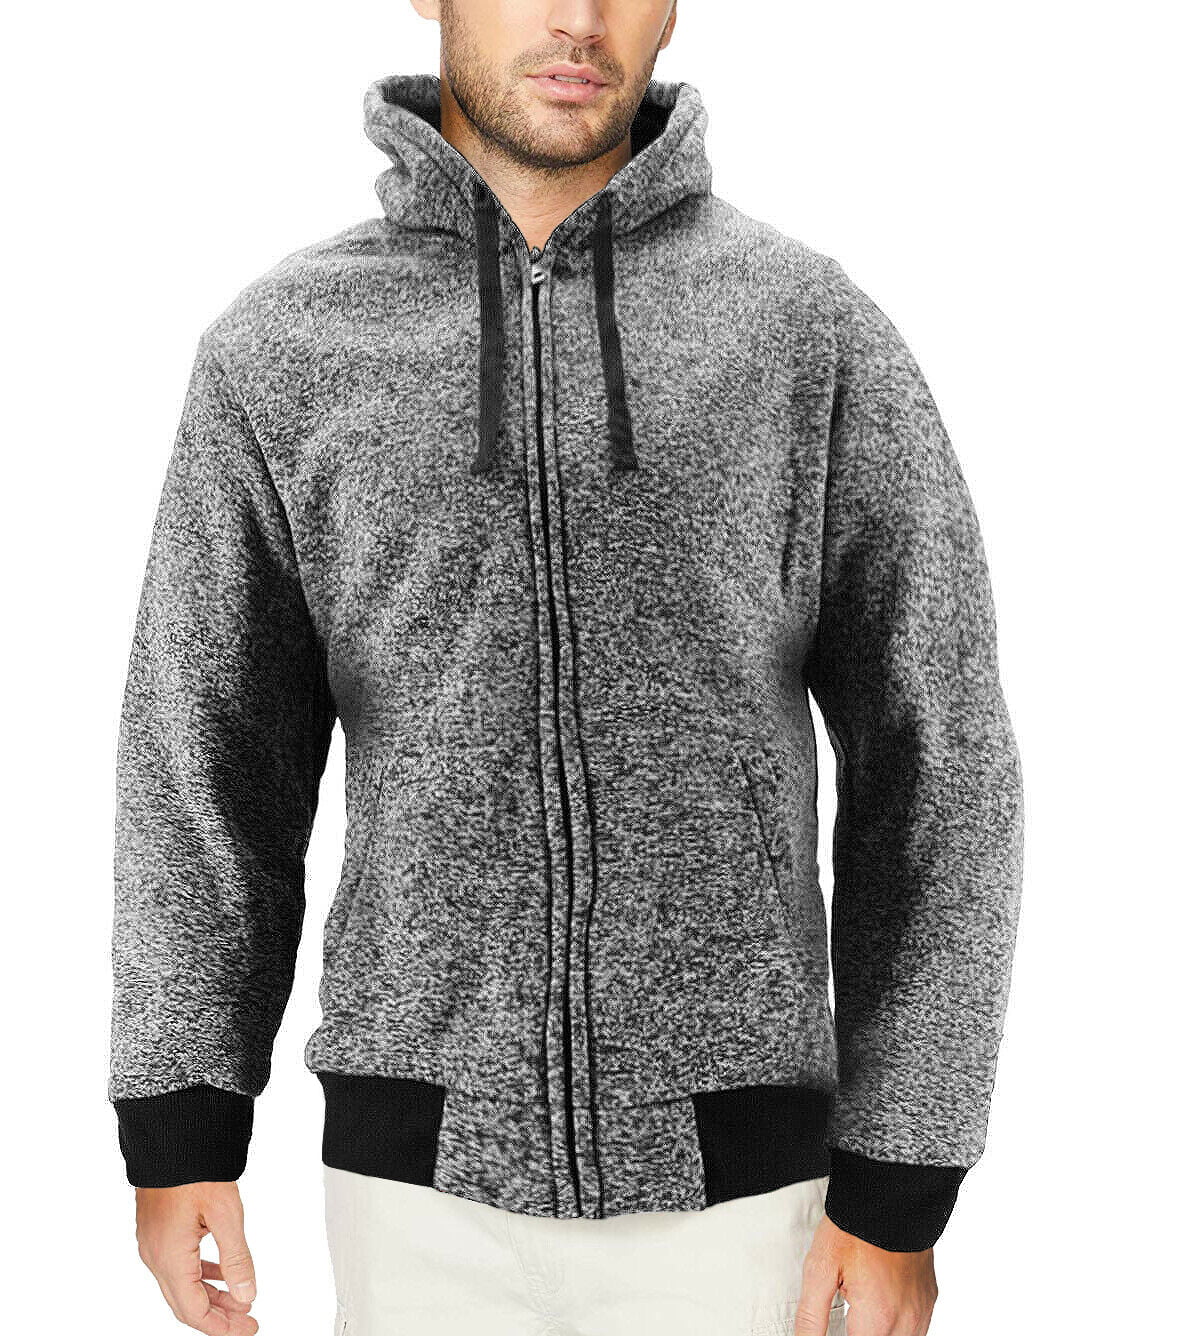 Men's Salt and Pepper Soft Sweater Sherpa Lined Heathered Zip Up Hoodie ...